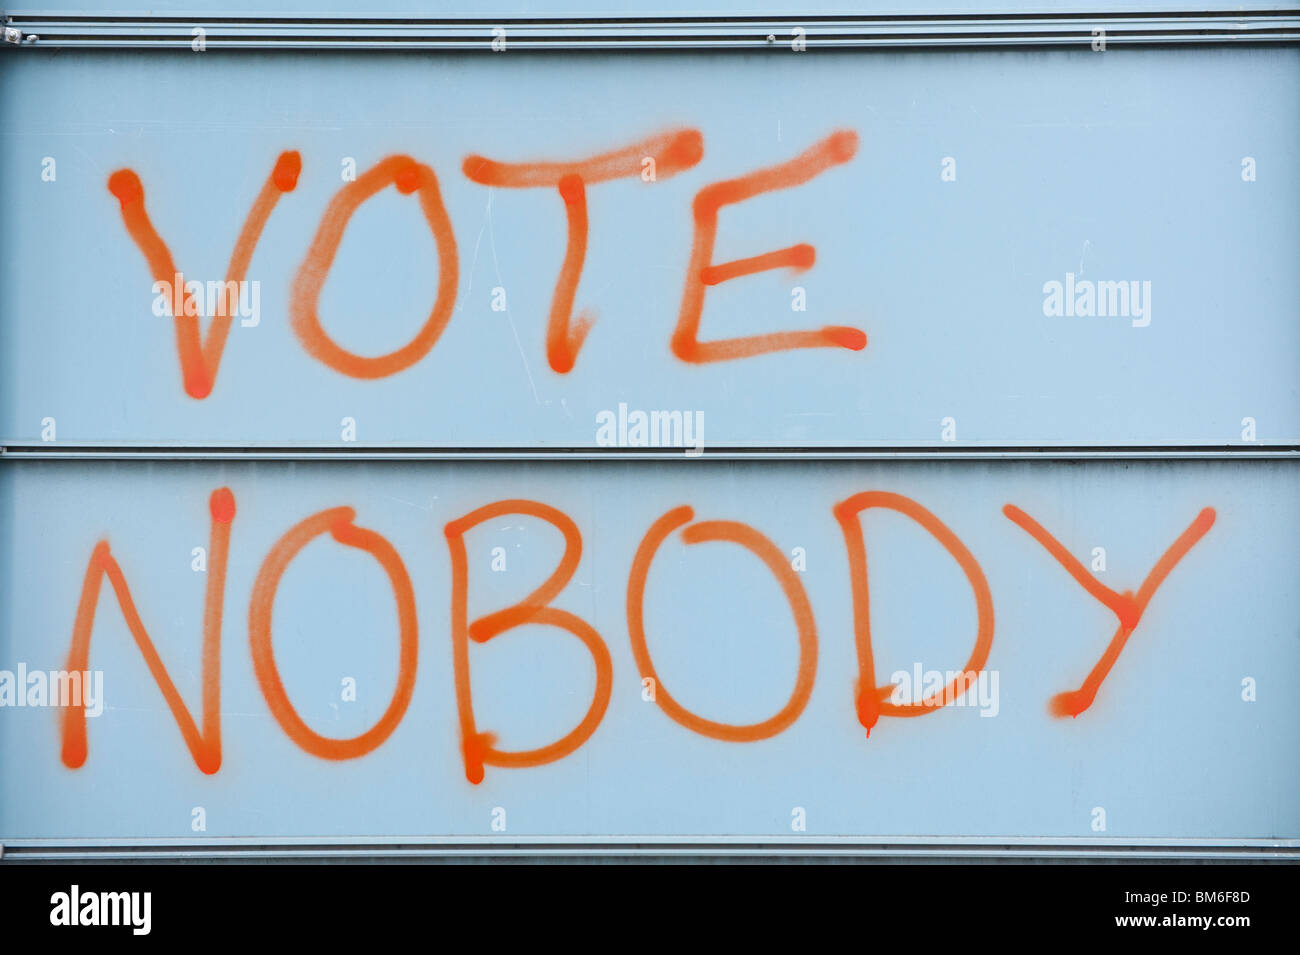 VOTE NOBODY graffiti on rear of roadsign in Cardiff South Wales UK Stock Photo